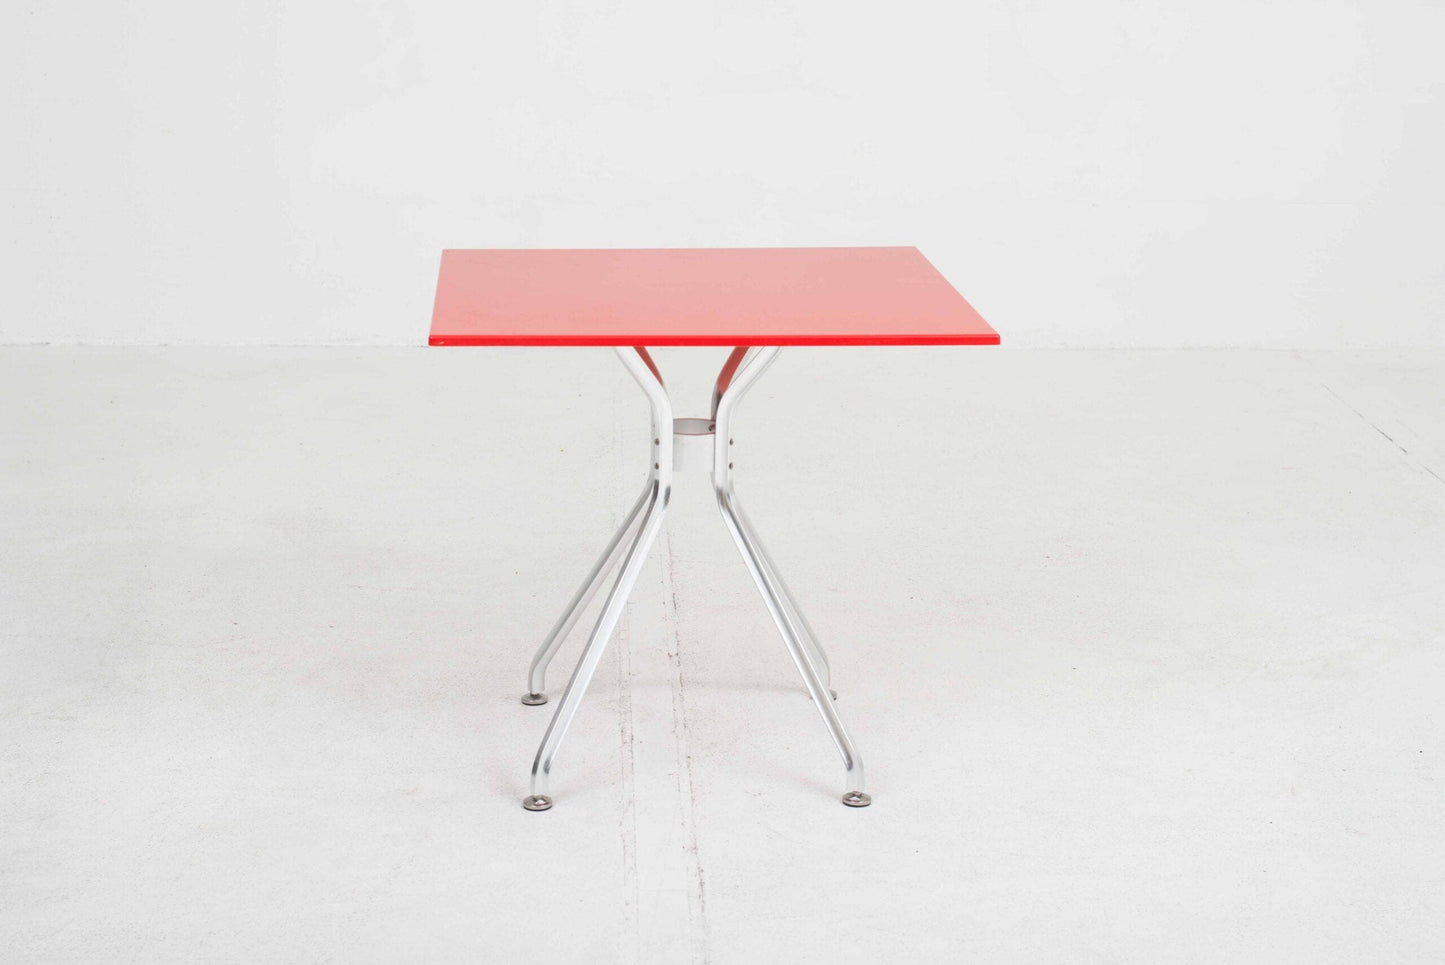 Seledue garden table Alu4 by Kurt Thut in fire red and square Vintage